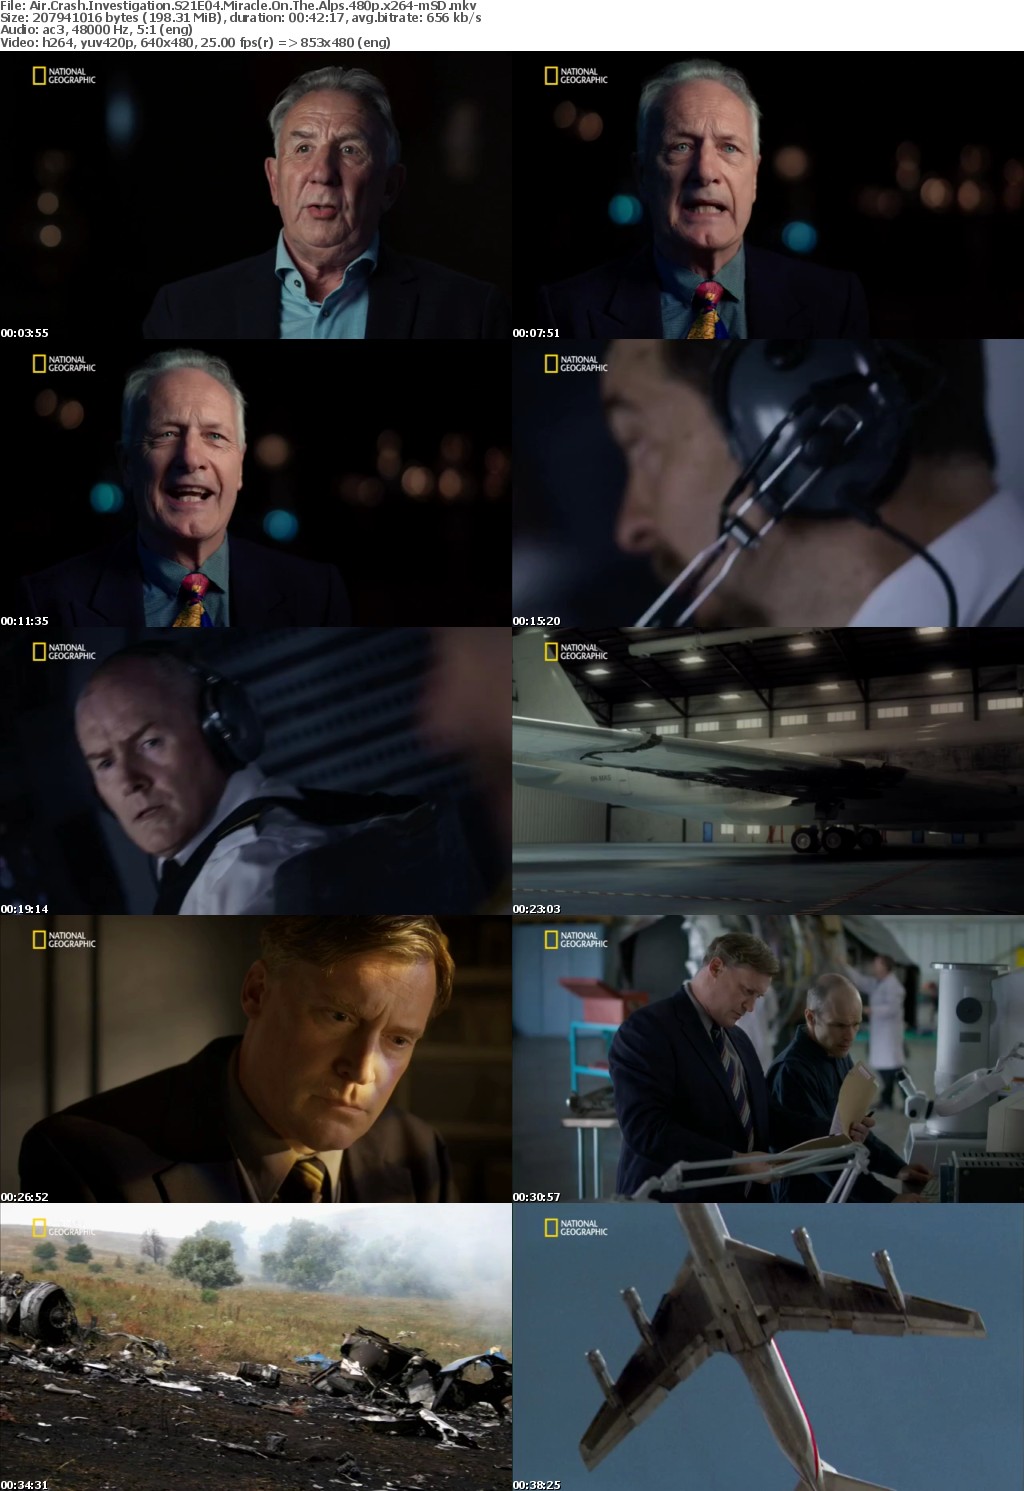 Air Crash Investigation S21E04 Miracle On The Alps 480p x264-mSD